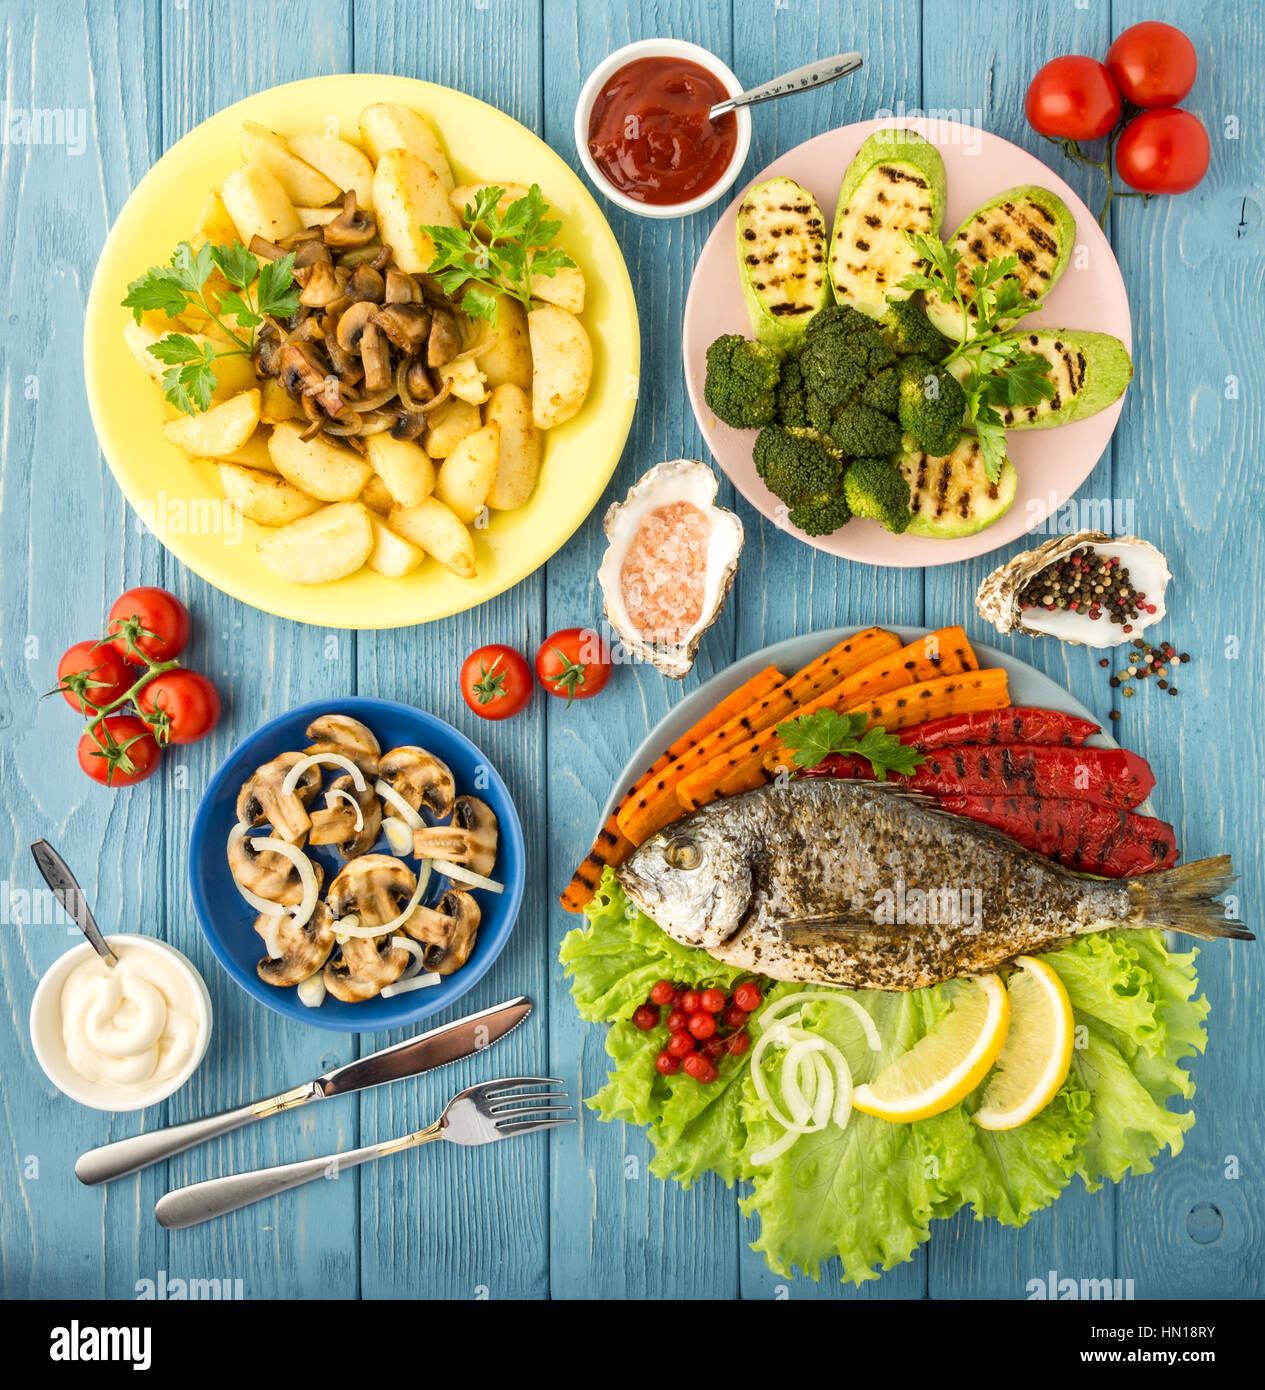 Delicious and nutritious meal rich in vitamins and minerals with fish and grilled vegetables: potatoes, mushrooms, carrot, tomato, broccoli, pepper, s Stock Photo